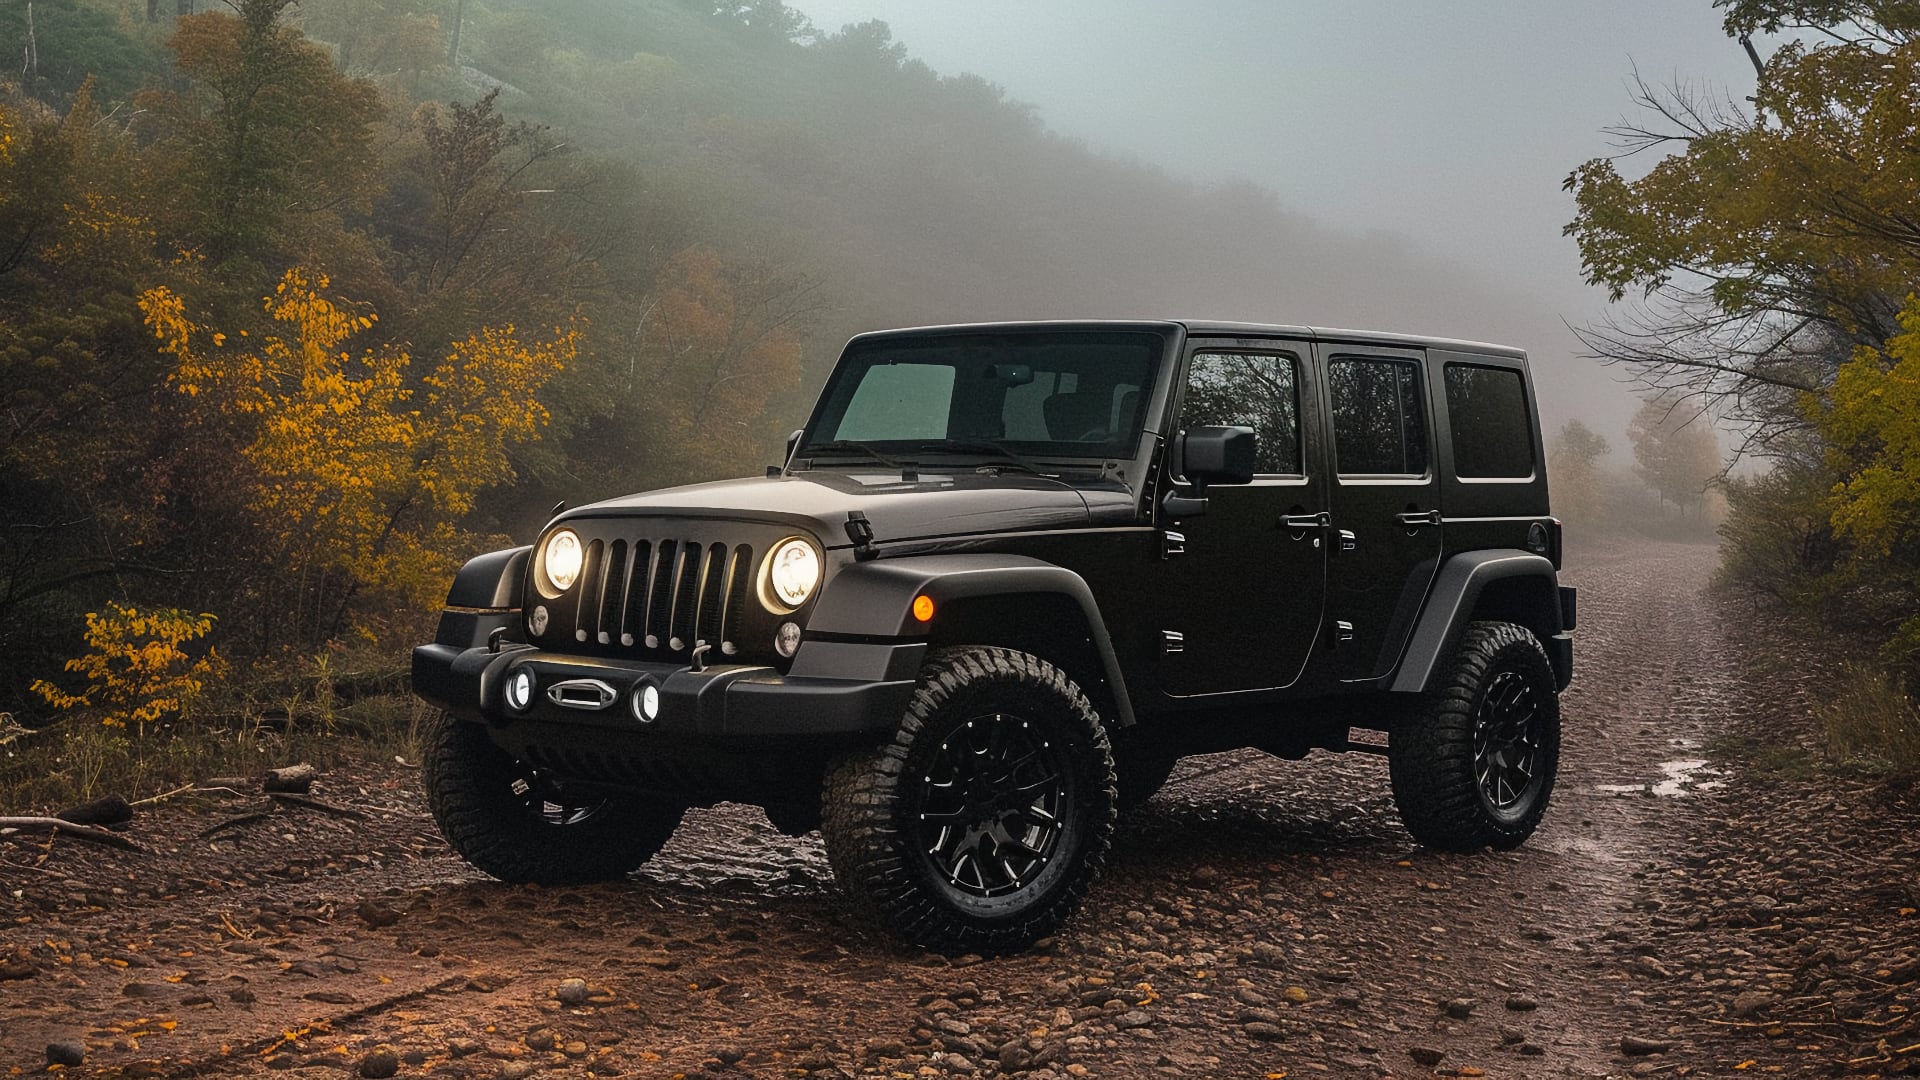 Jeep Wrangler owners should be aware of the years to avoid when considering a purchase.